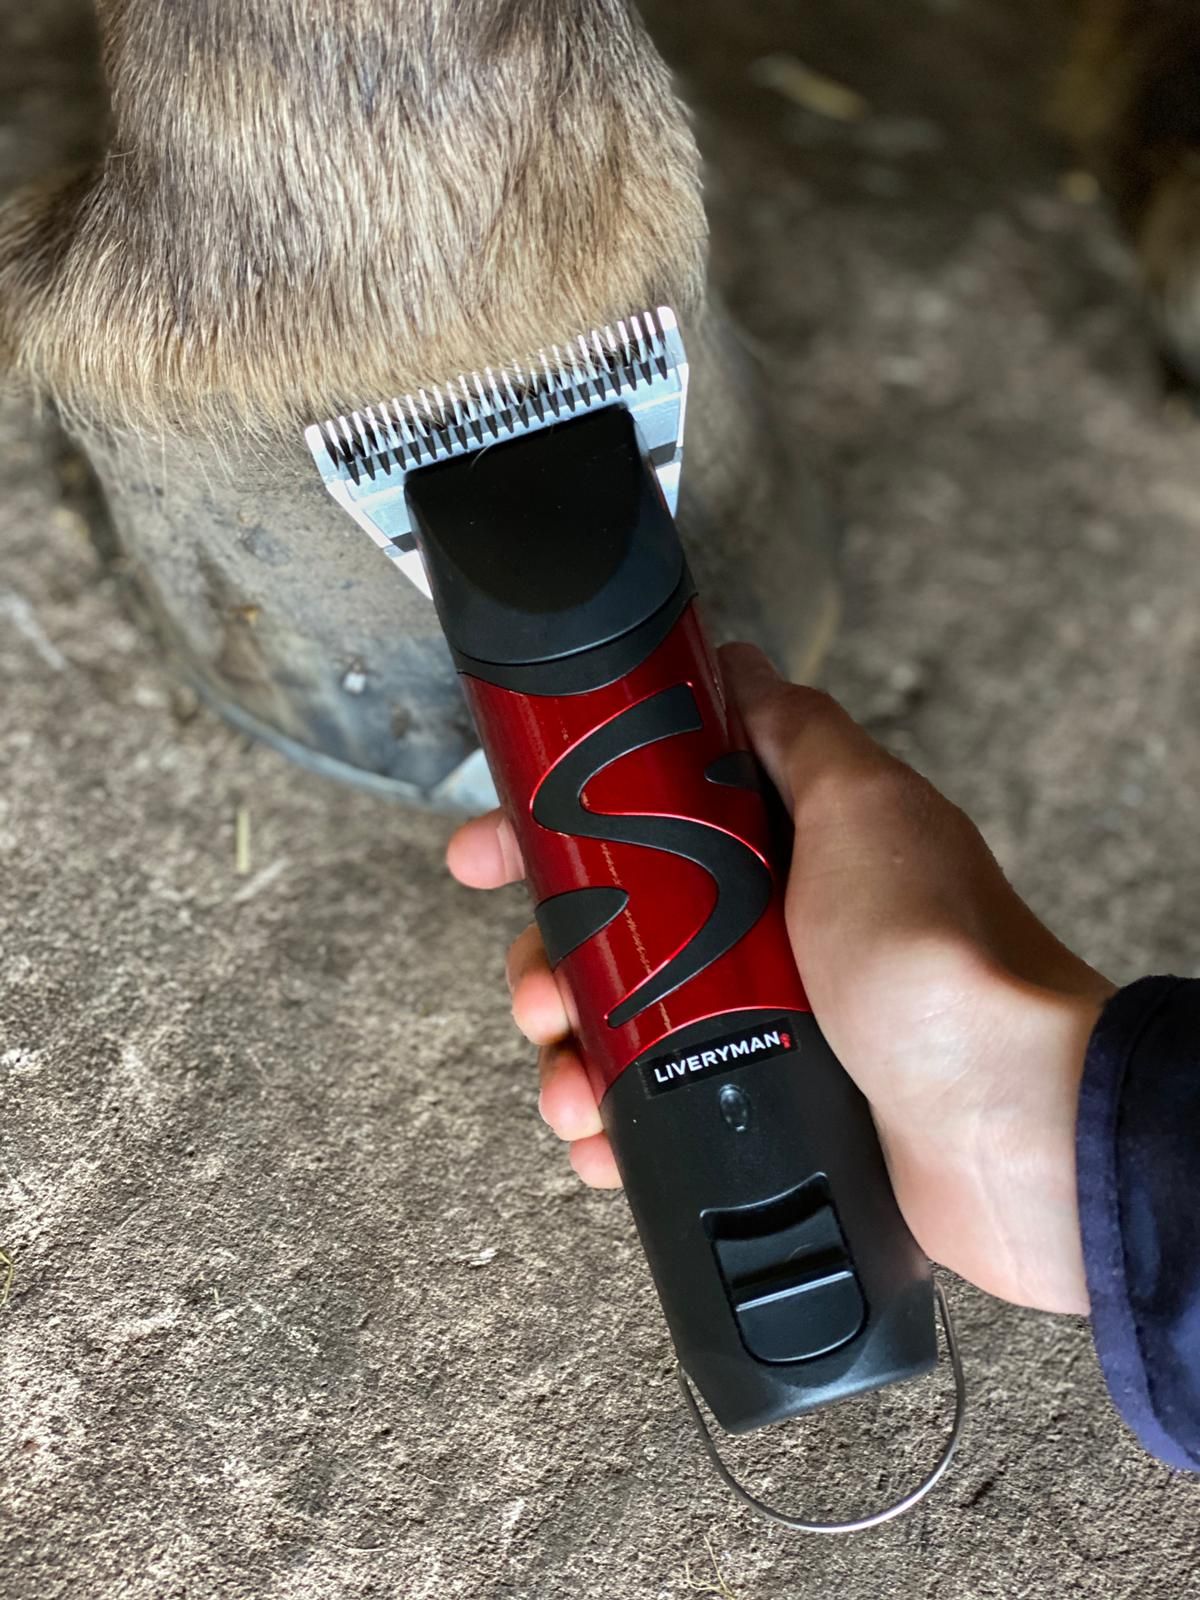 All-In-One Horse and Dog Clippers, with snap-on blades.